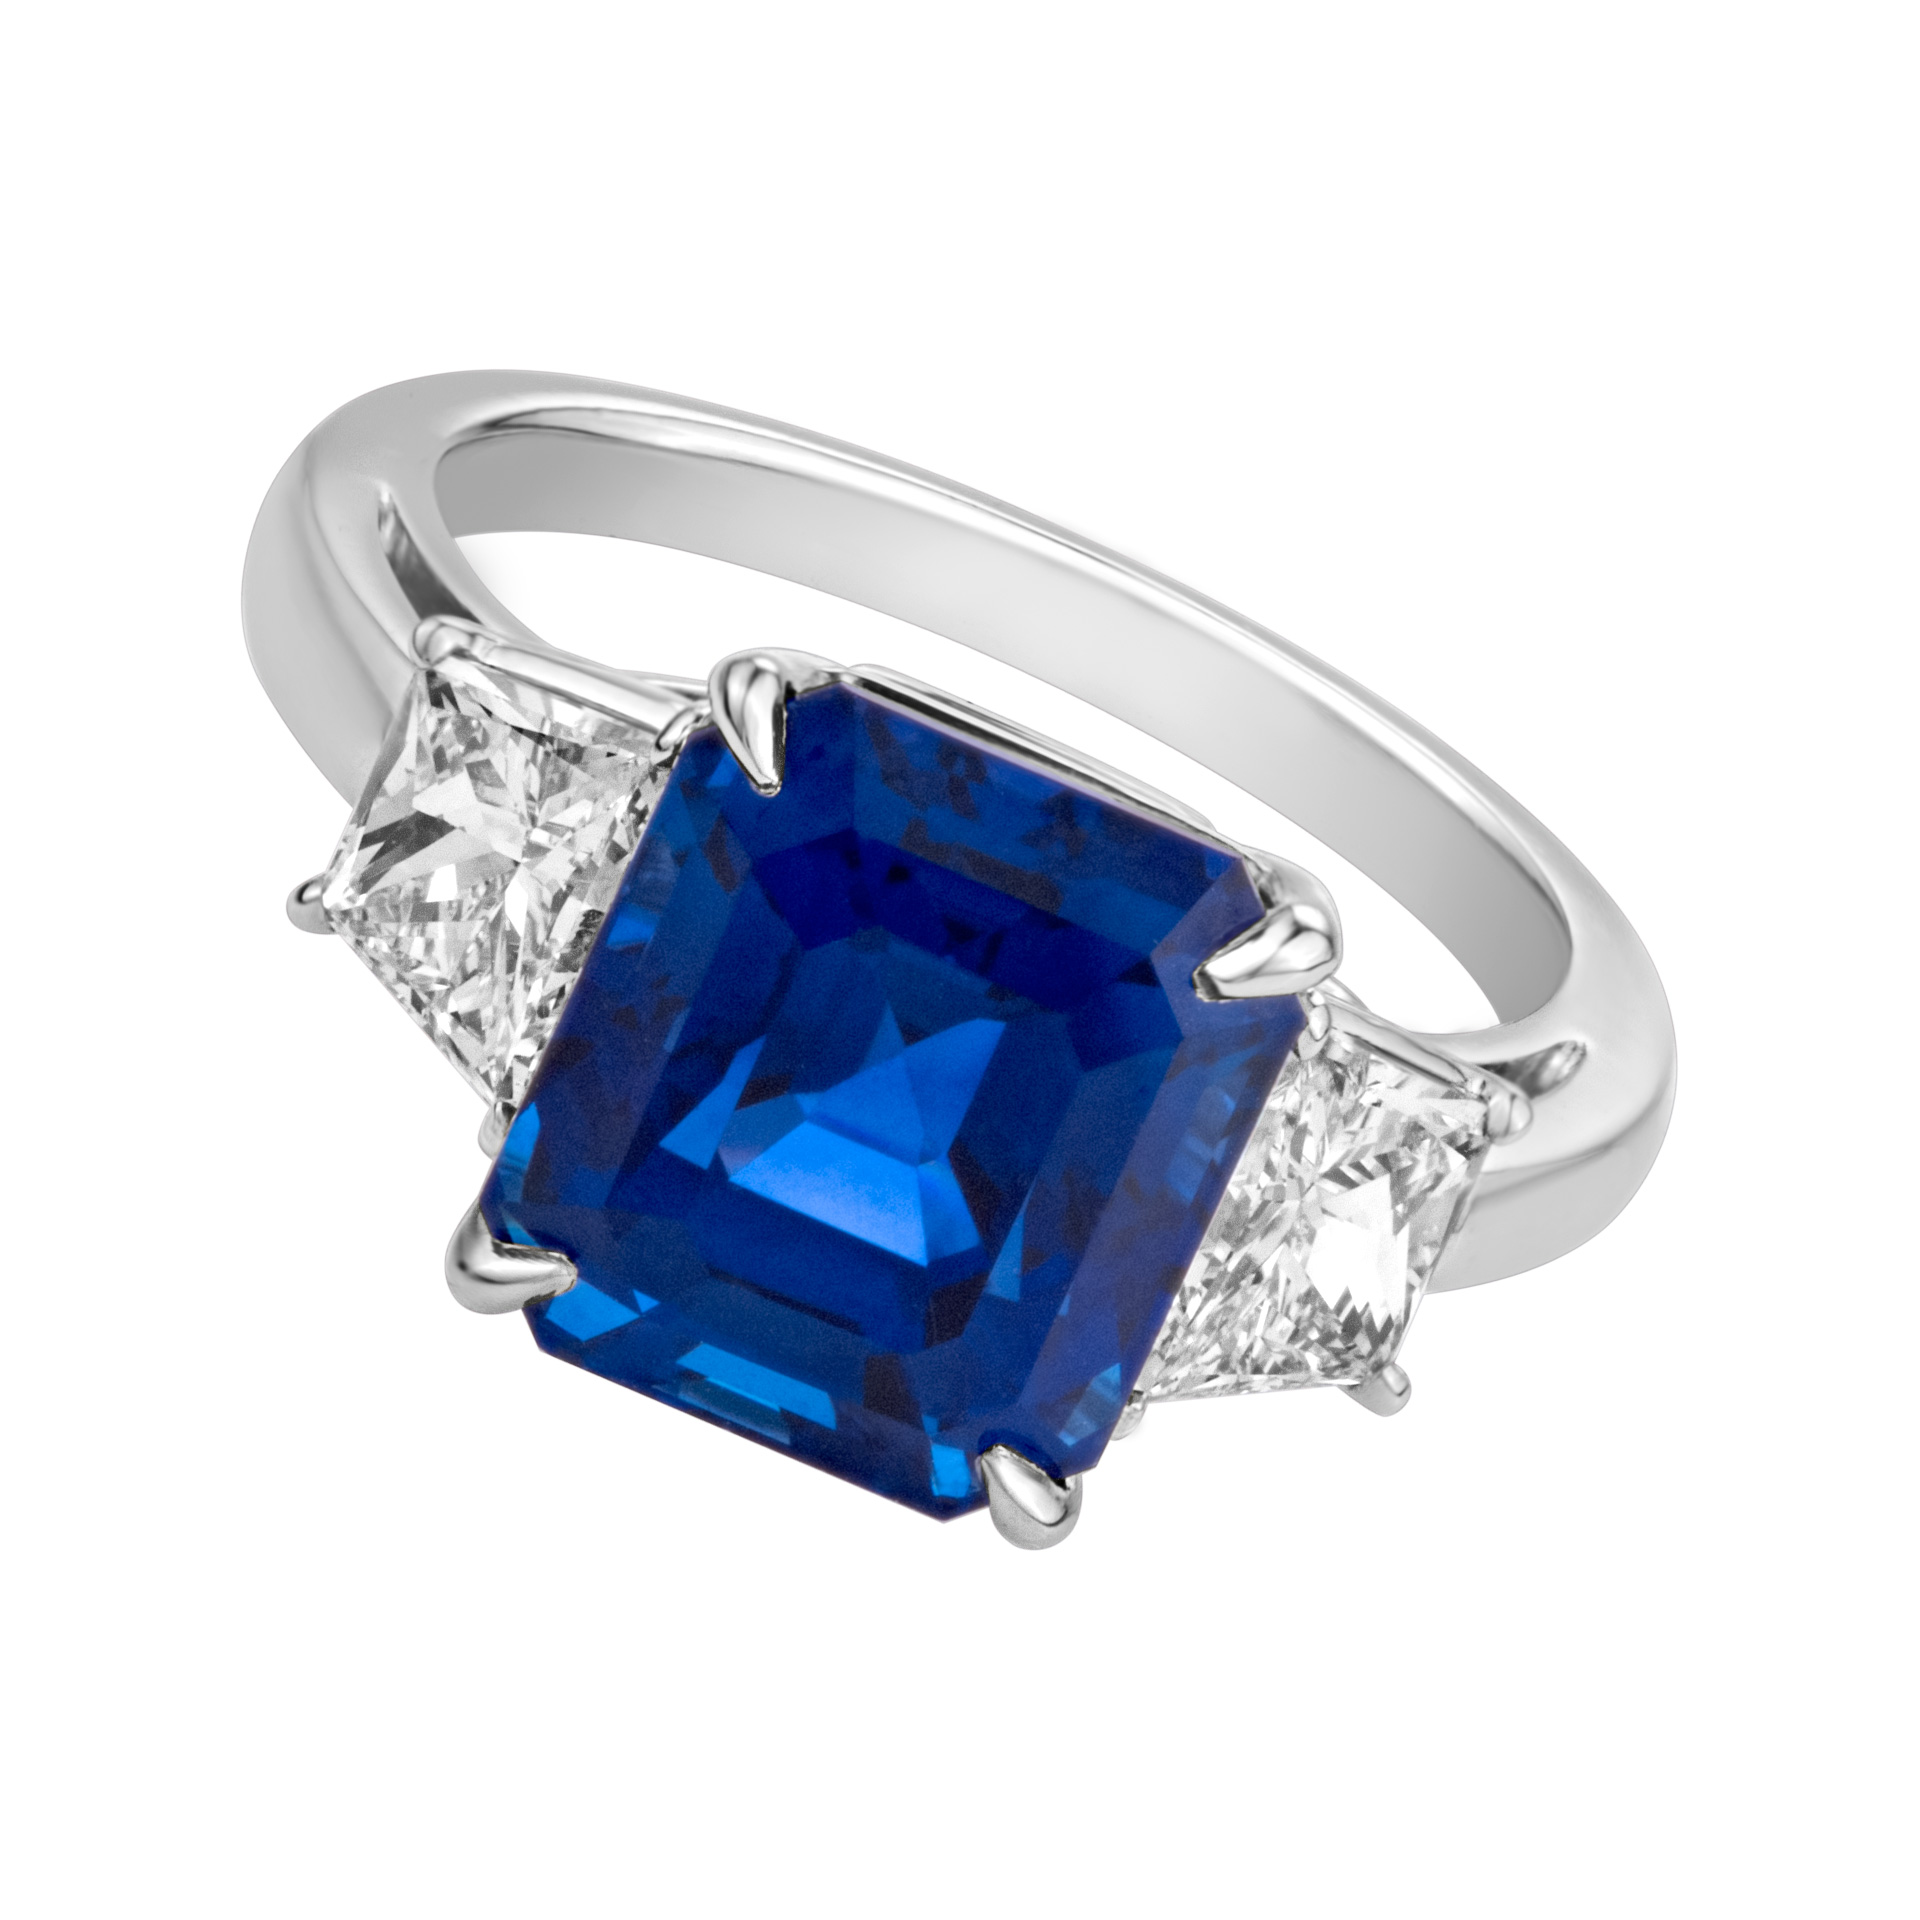 Certified Emerald cut sapphire and diamond ring set in Platinum